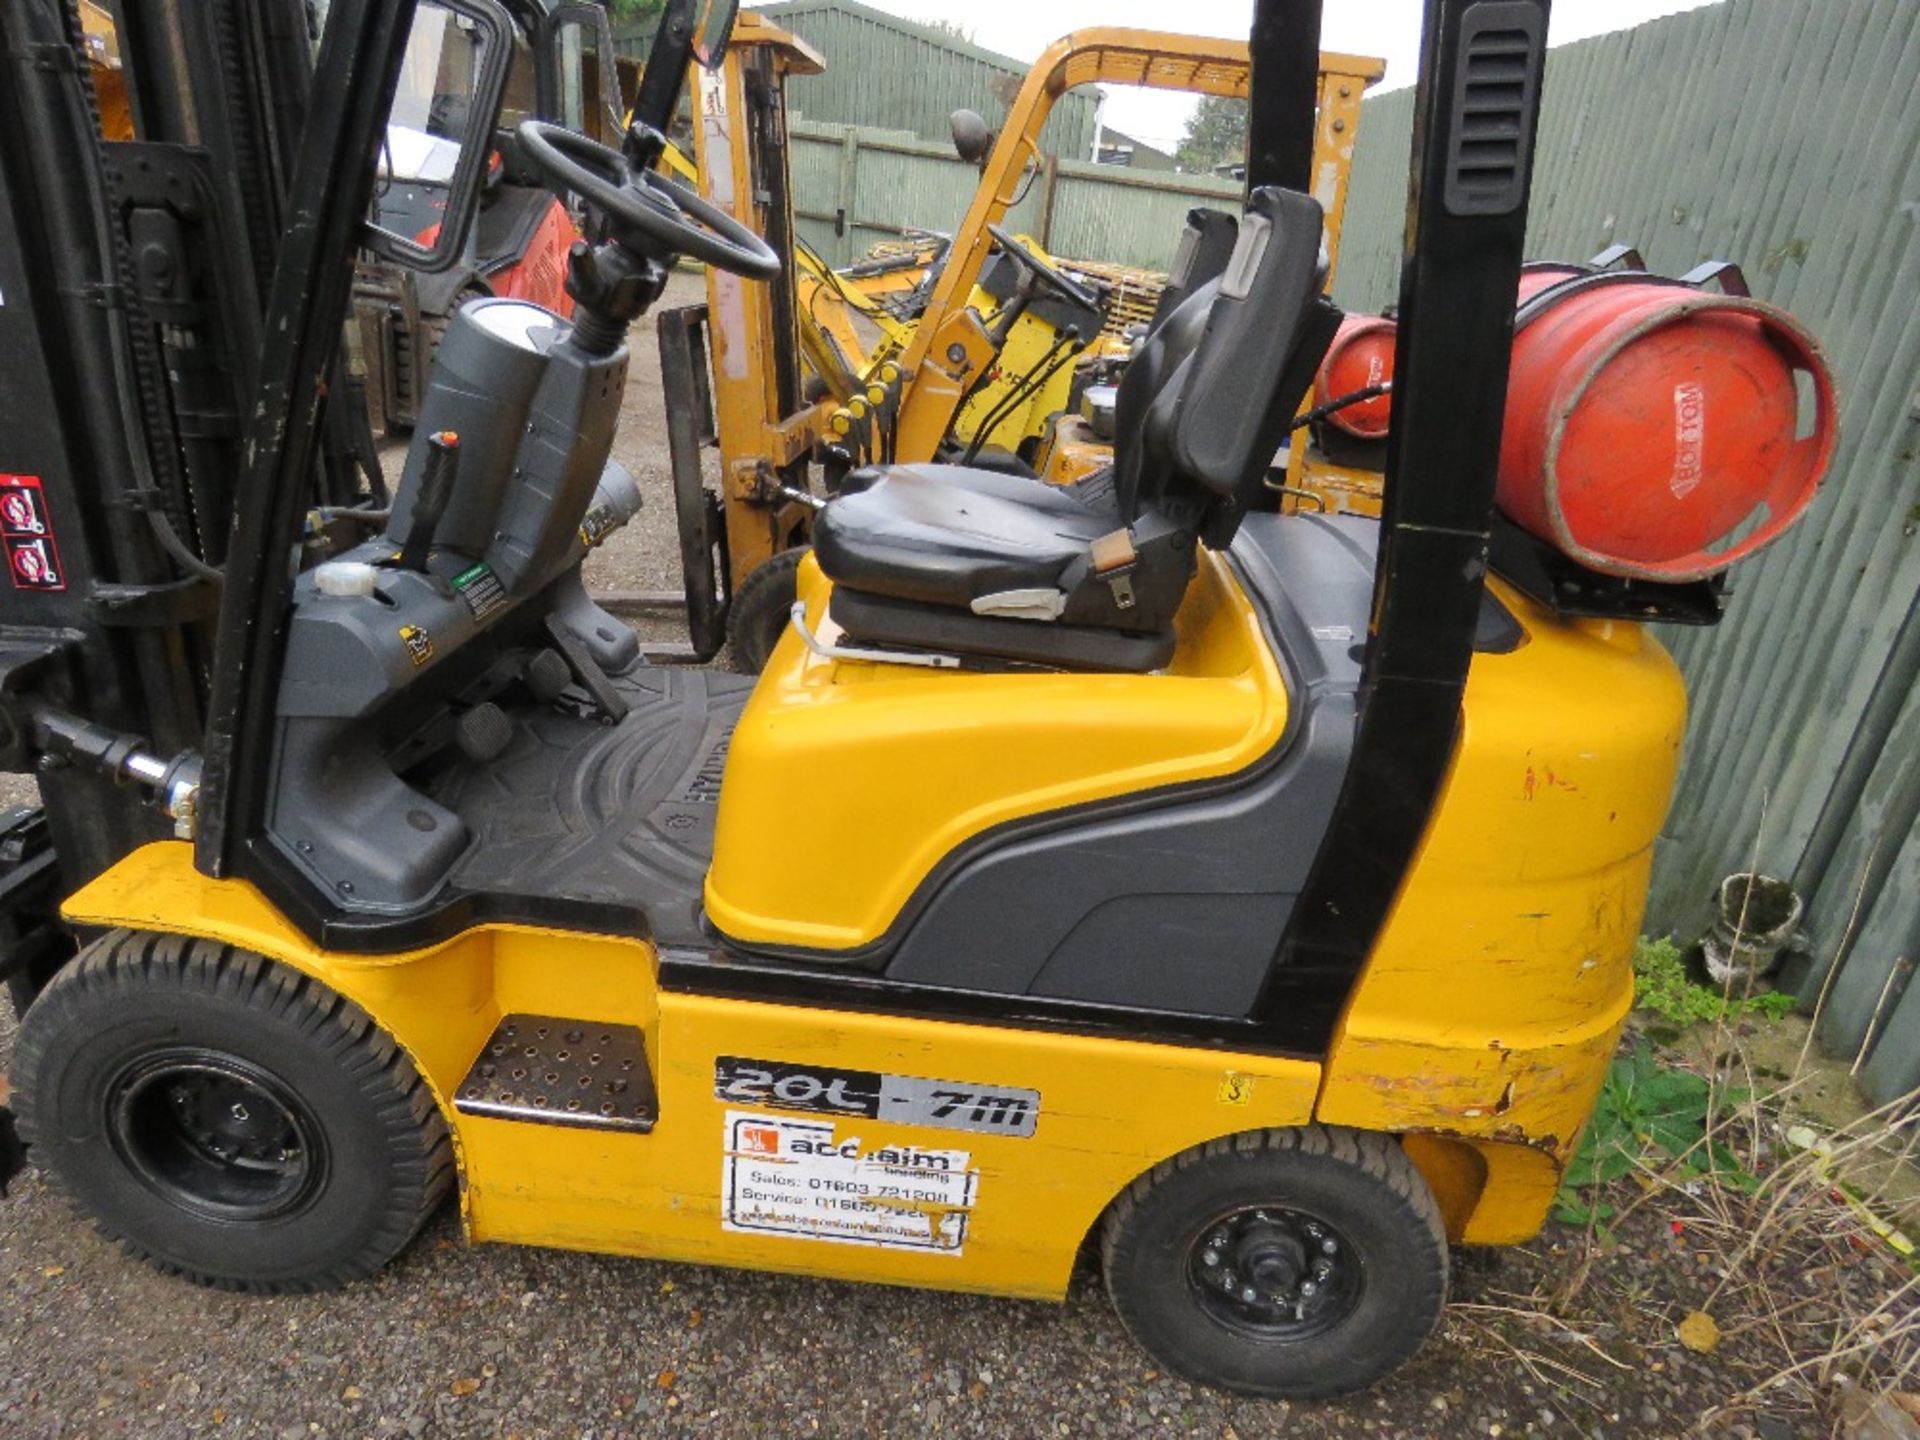 HYUNDAI 20L-7M GAS POWERED 2 TONNE FORKLIFT TRUCK. YEAR 2018 BUILD, LITTLE USED RECENTLY. - Image 5 of 12